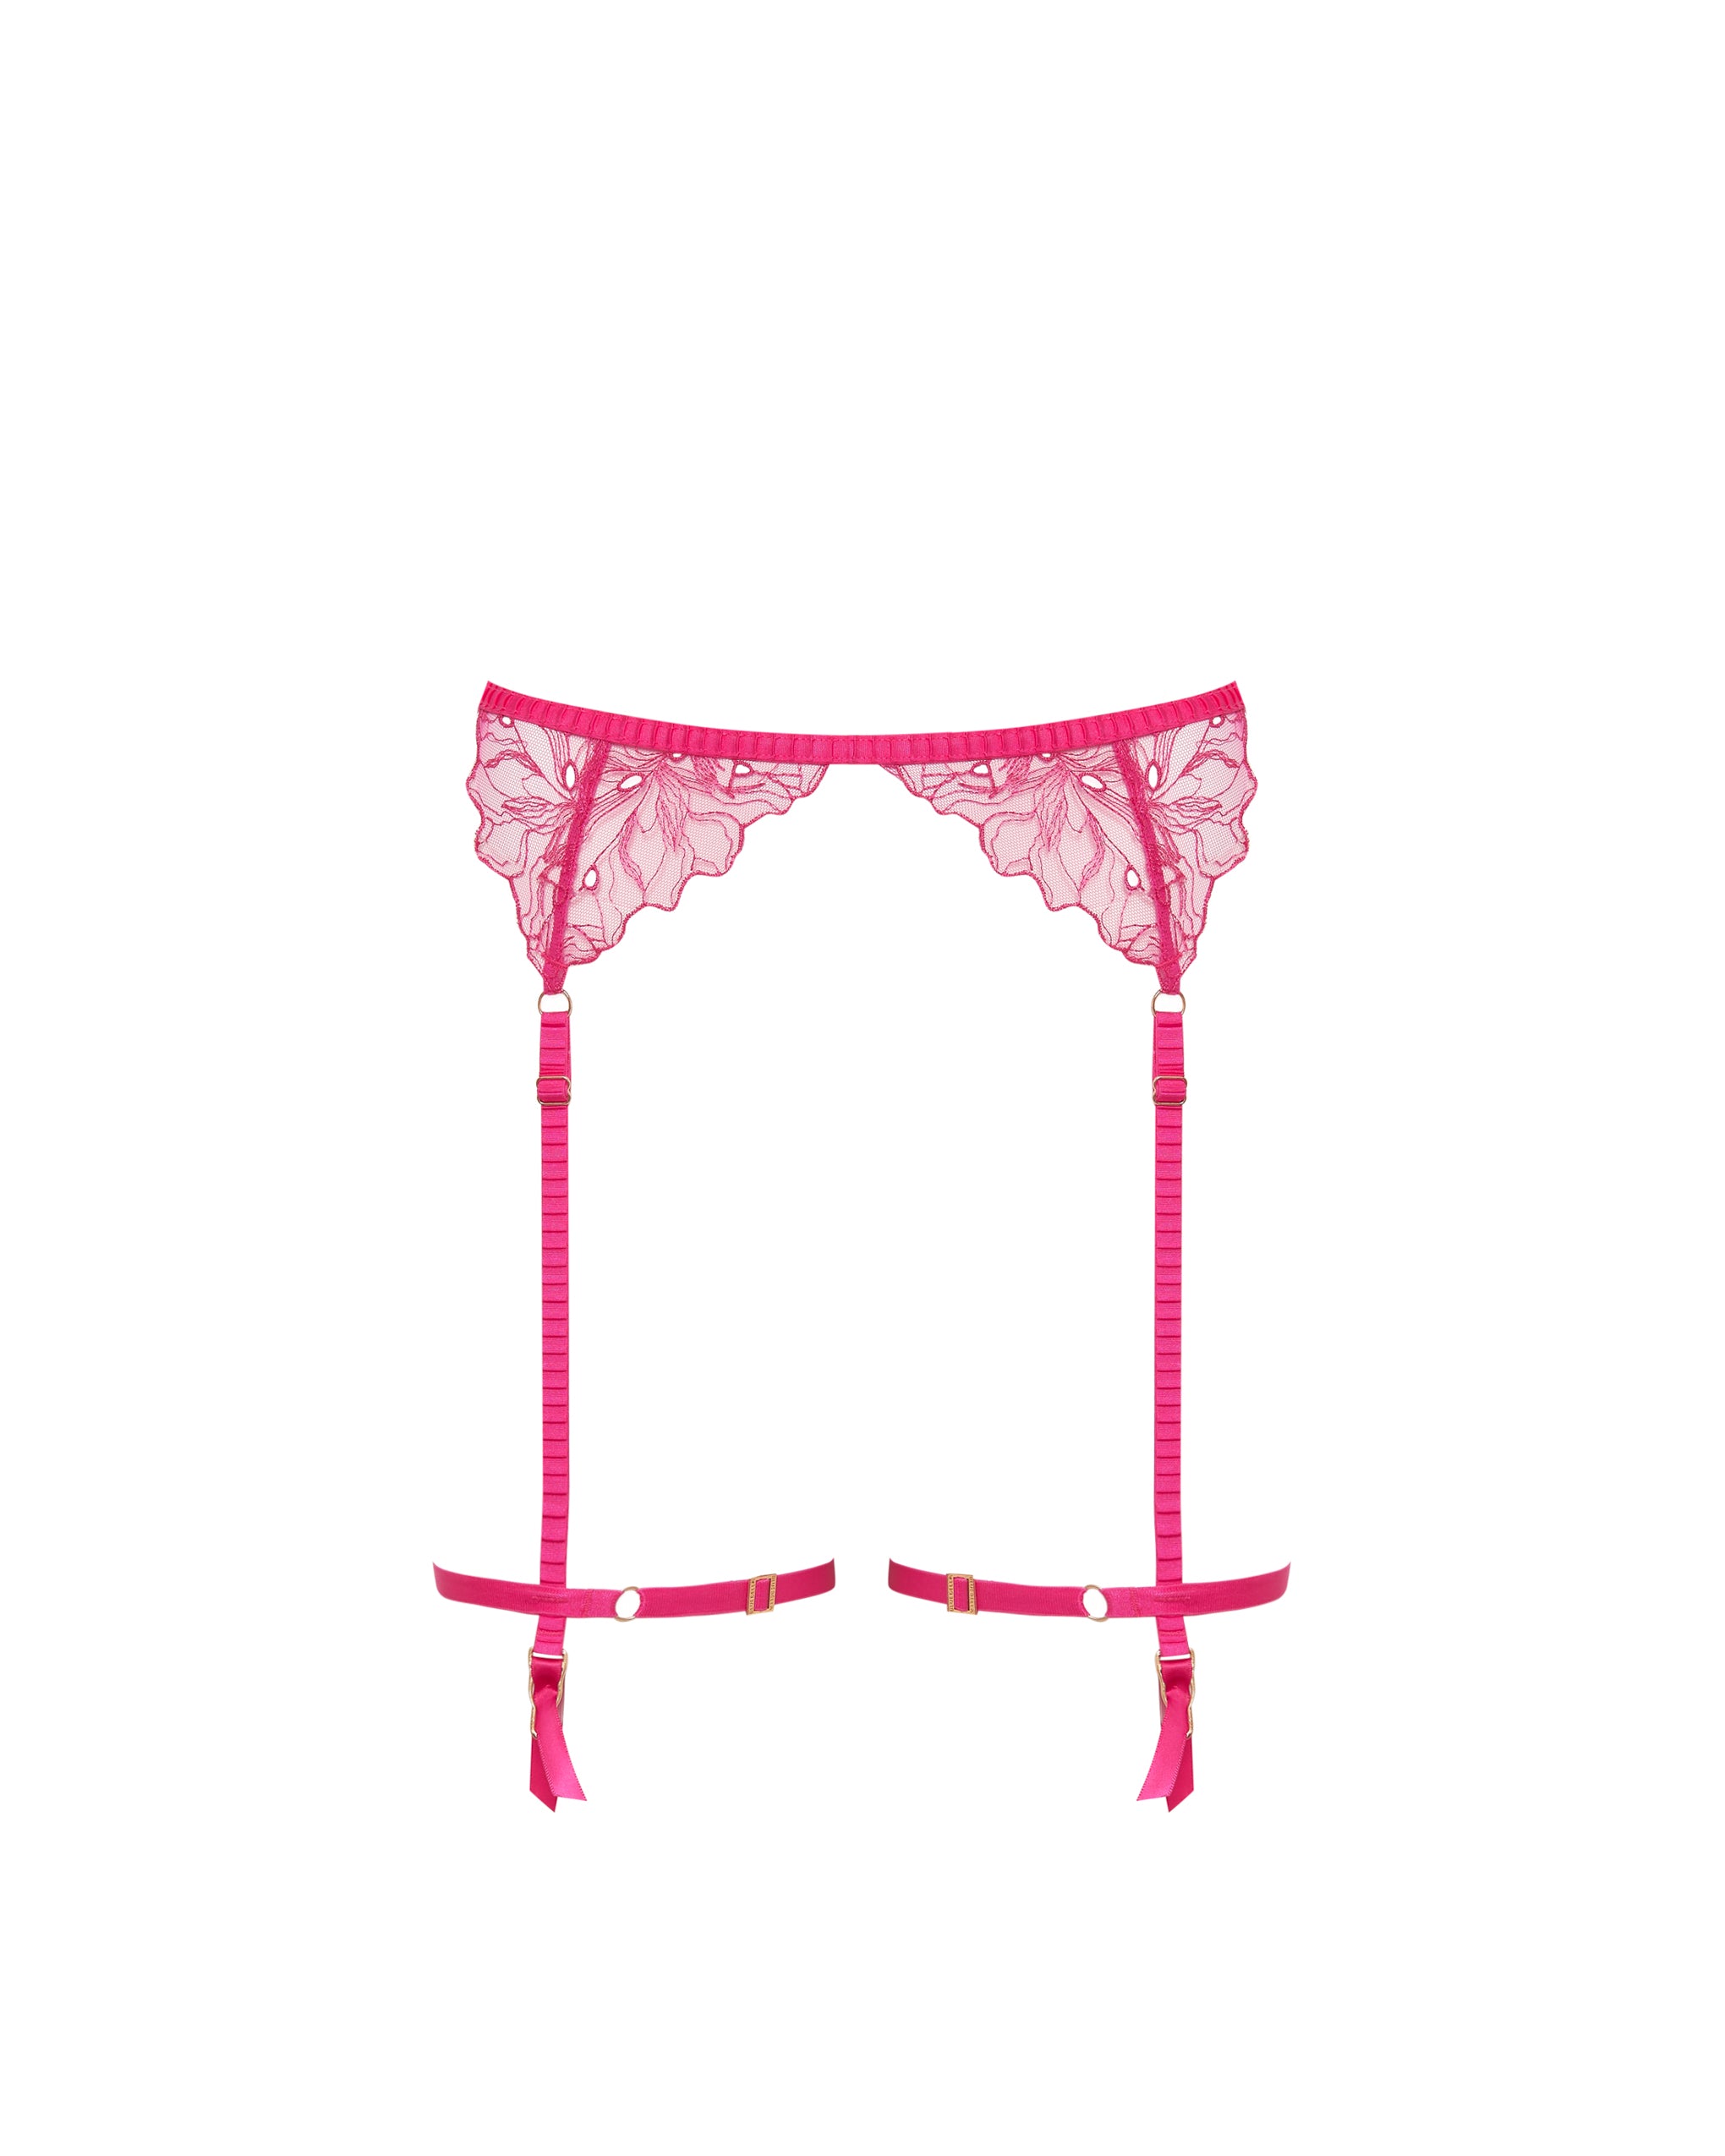 Bluebella Astra Suspender Thigh Harness Fuchsia Pink product